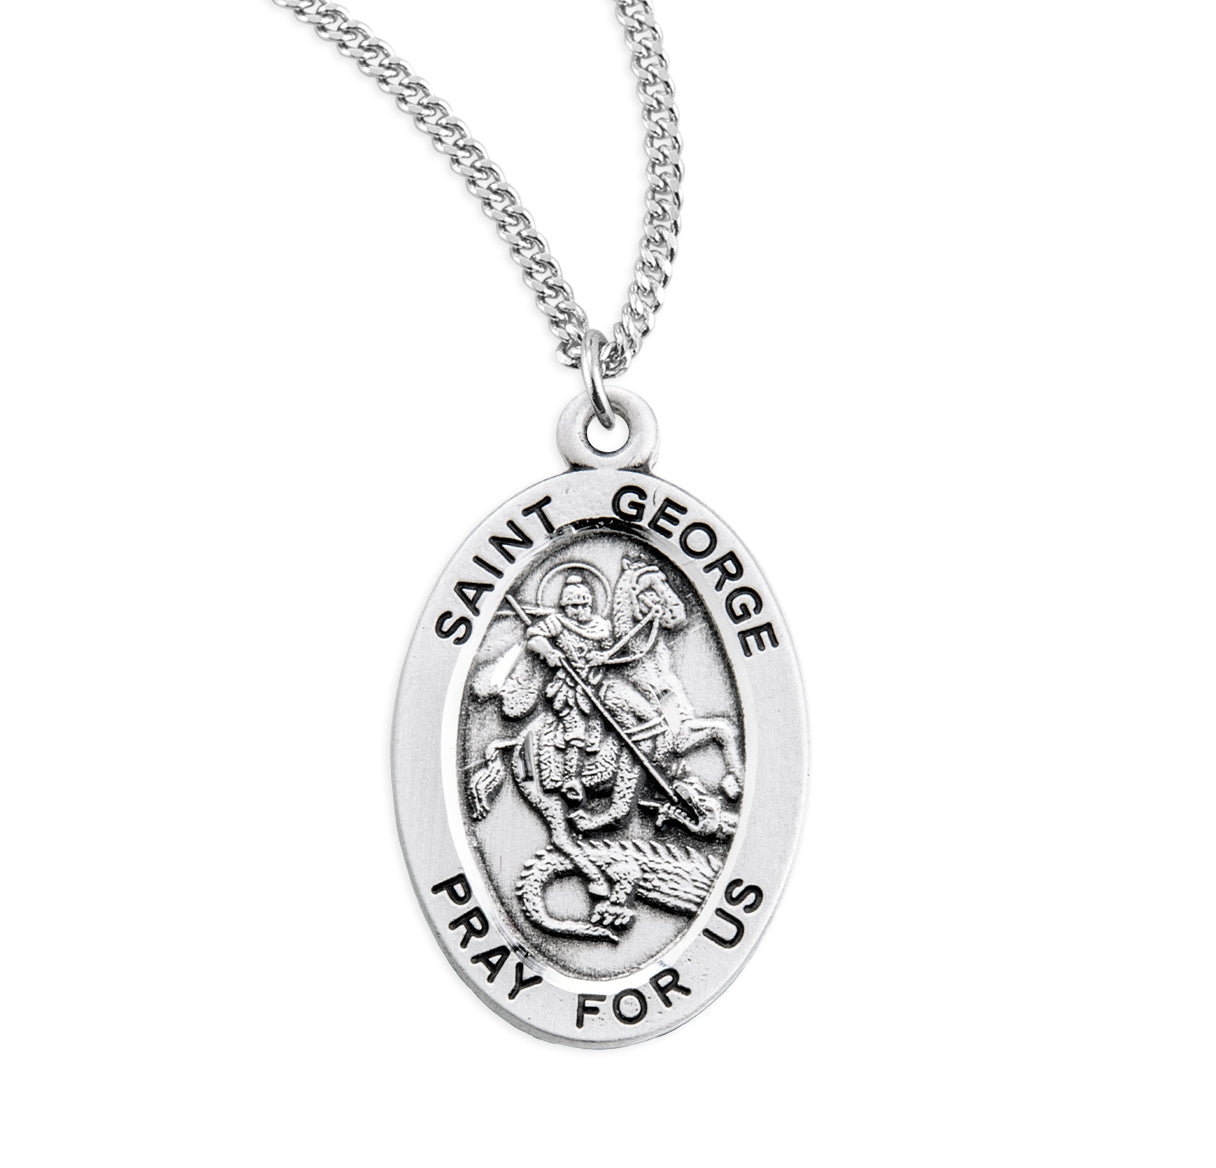 Patron Saint George Oval Sterling Silver Medal